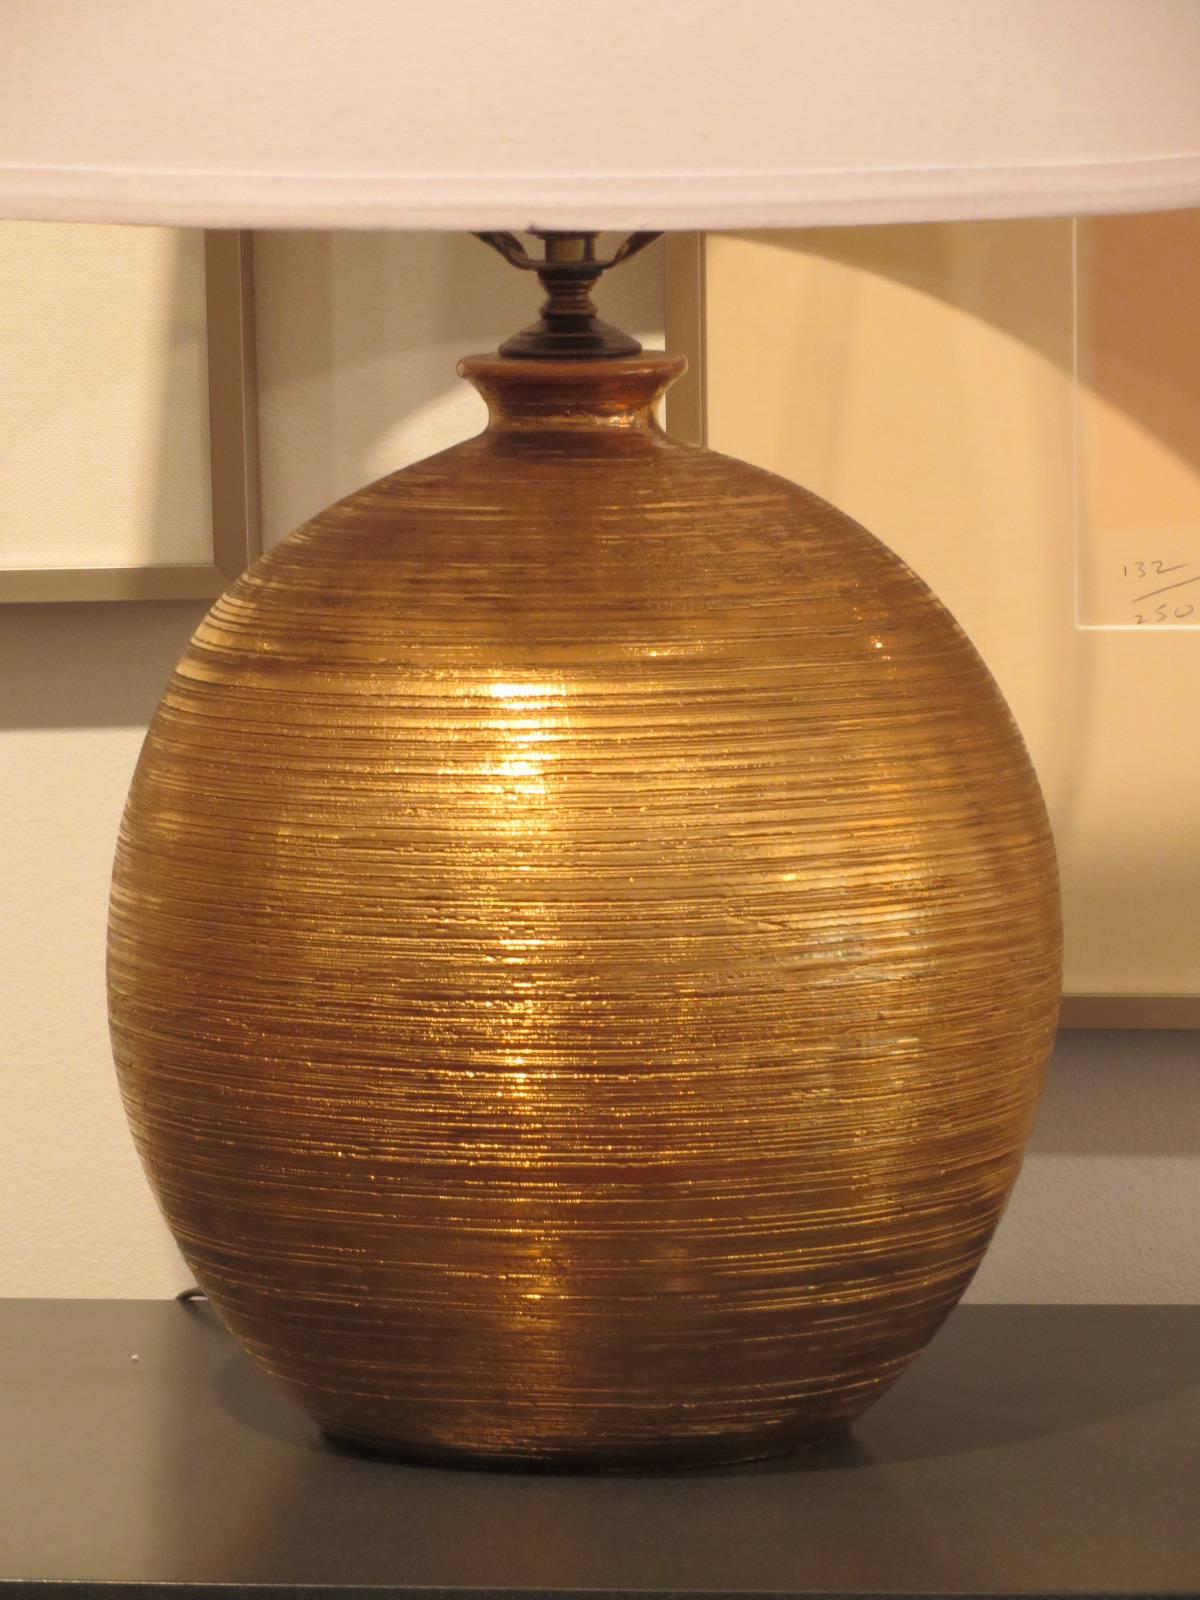 Striking 1960s table lamp, hand thrown by Bitossi. Glaze is 18-karat gold. The lamp was made for the Bergbaums Store in Sweden. Height includes shade.